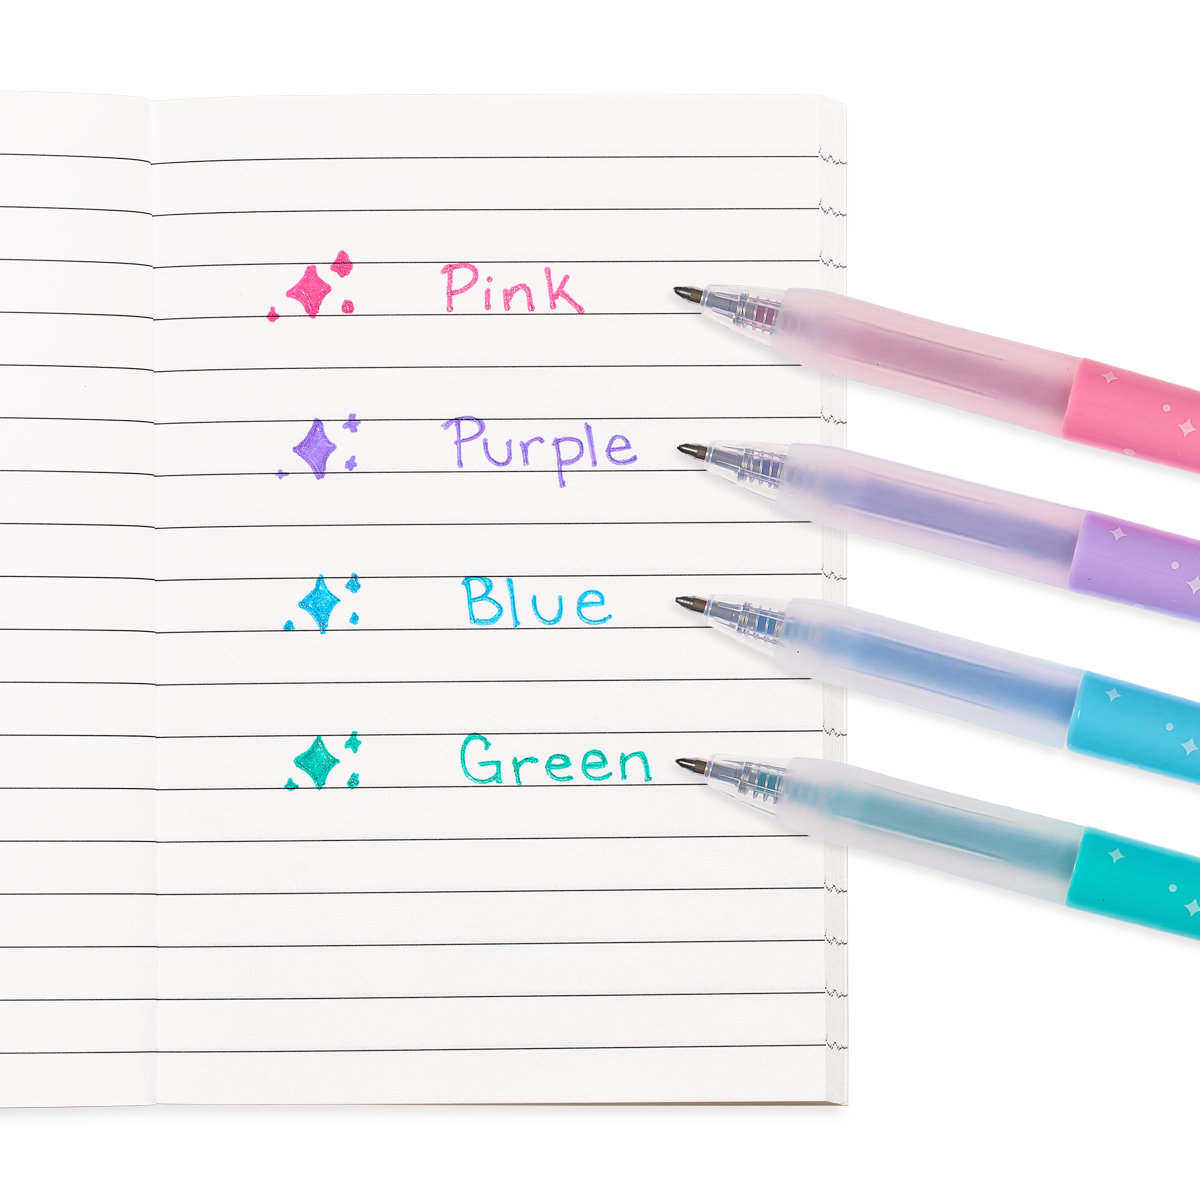 Oh My Glitter! - Retractable Glitter Ink Gel Pens Set of 12